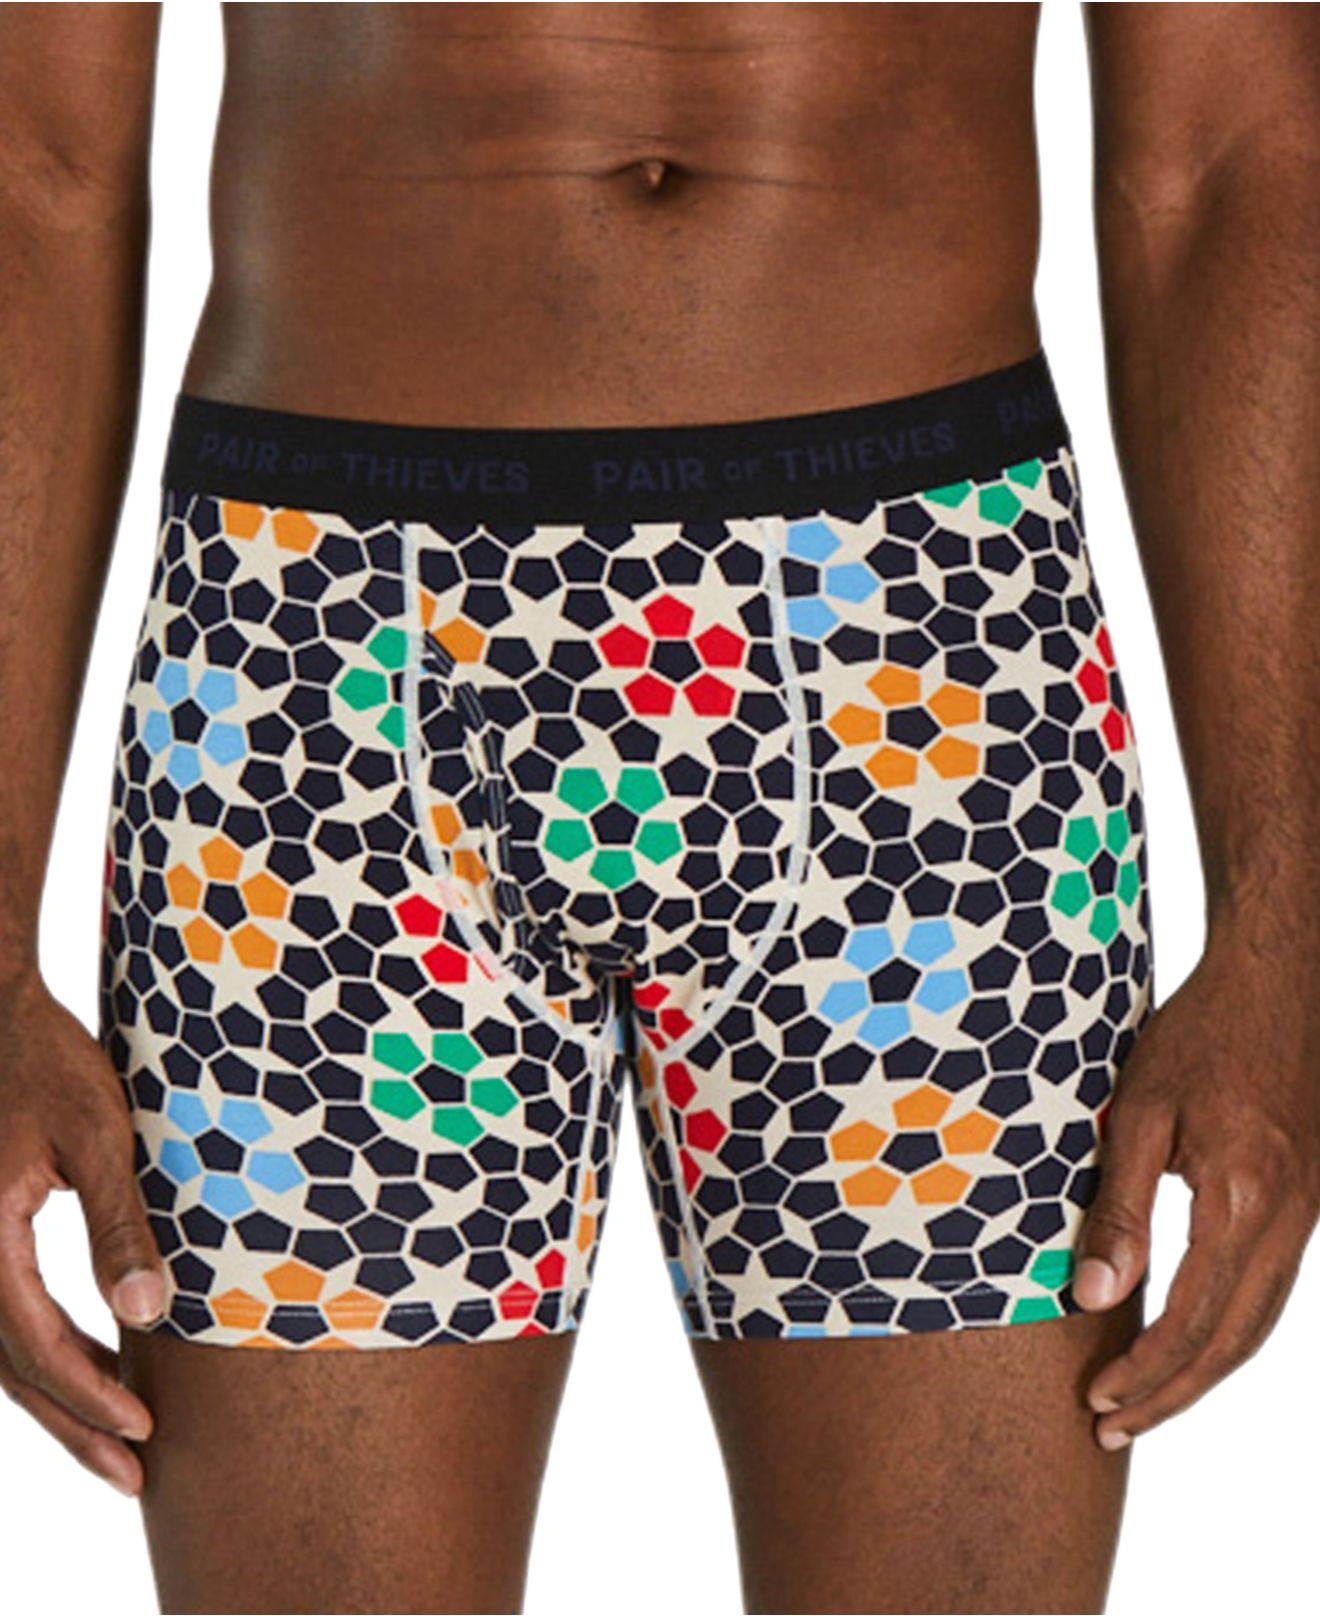 Pair of Thieves Gone Roque Boxer Brief 2-Pack